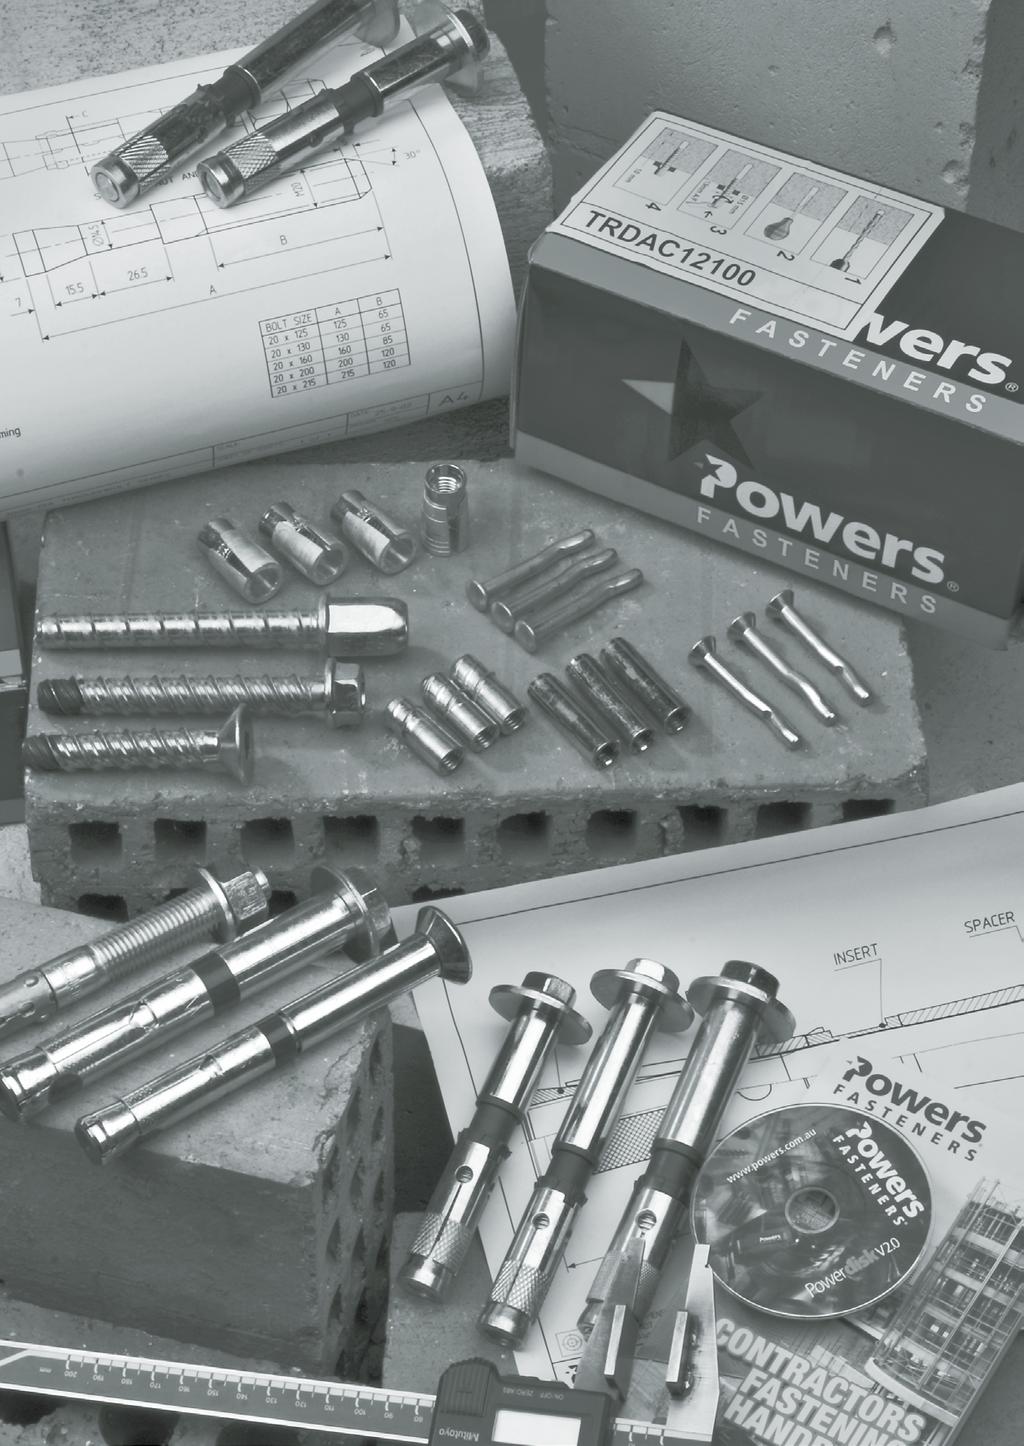 Contact Information for Powers Fasteners